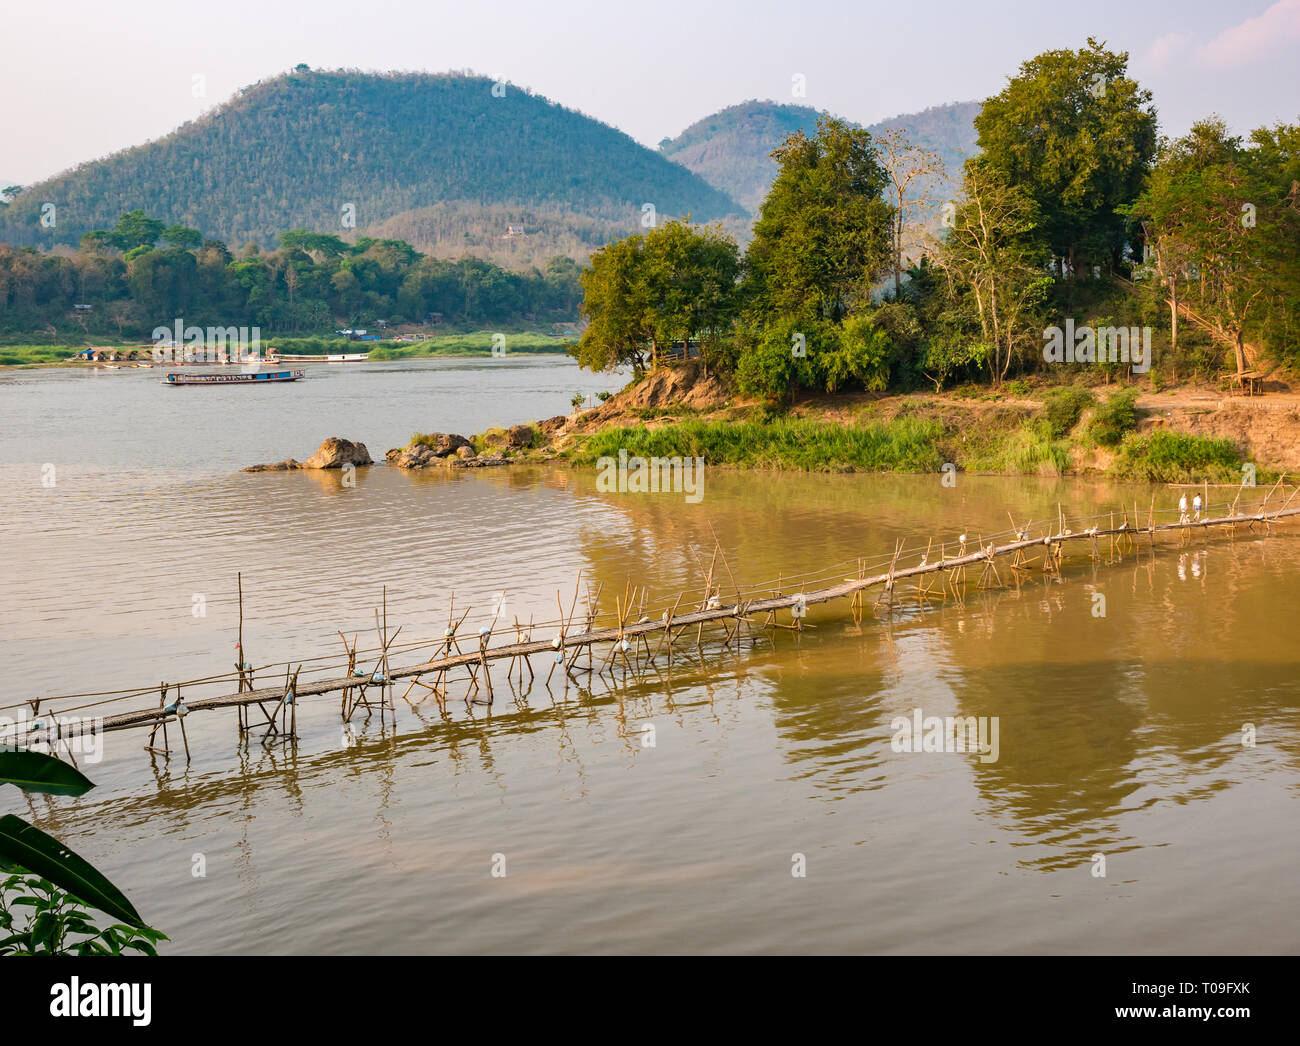 View of Mekong river with rickety bamboo cane bridge over Nam Kahn river tributary of Mekong, Luang Prabang, Laos, Indochina, SE Asia Stock Photo